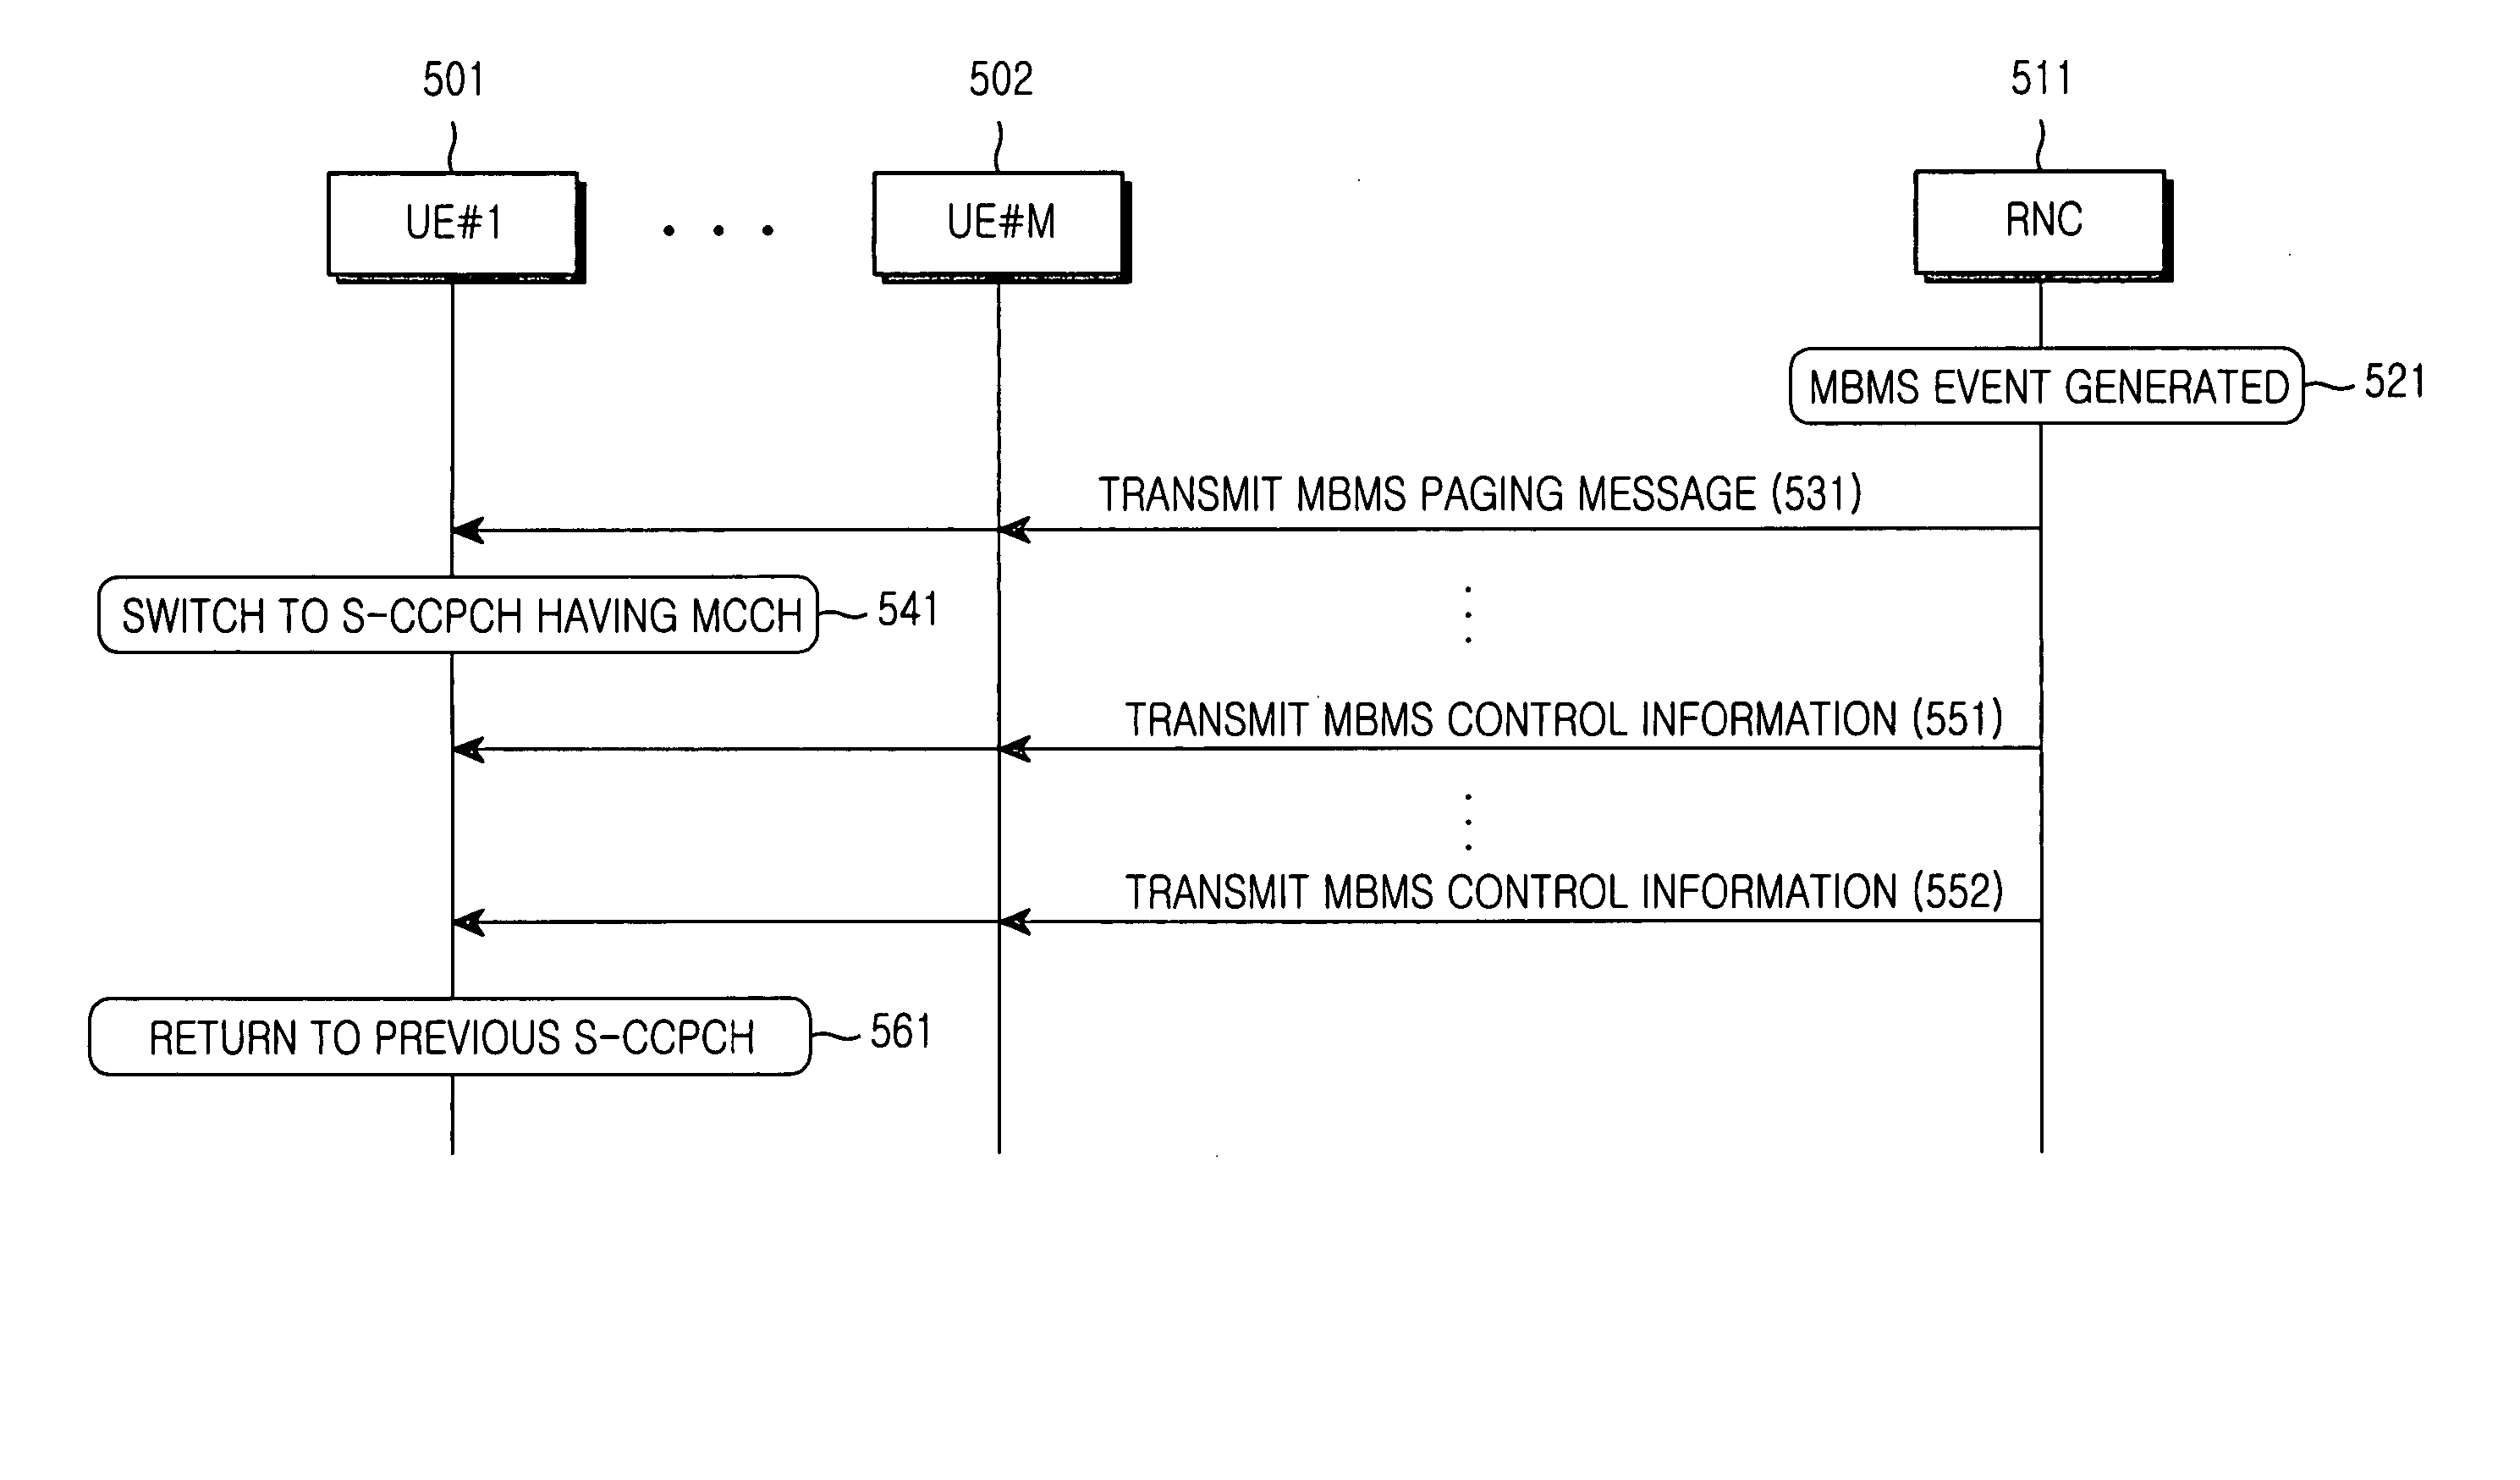 Apparatus and method for transmitting/receiving MBMS control information in a mobile communication system